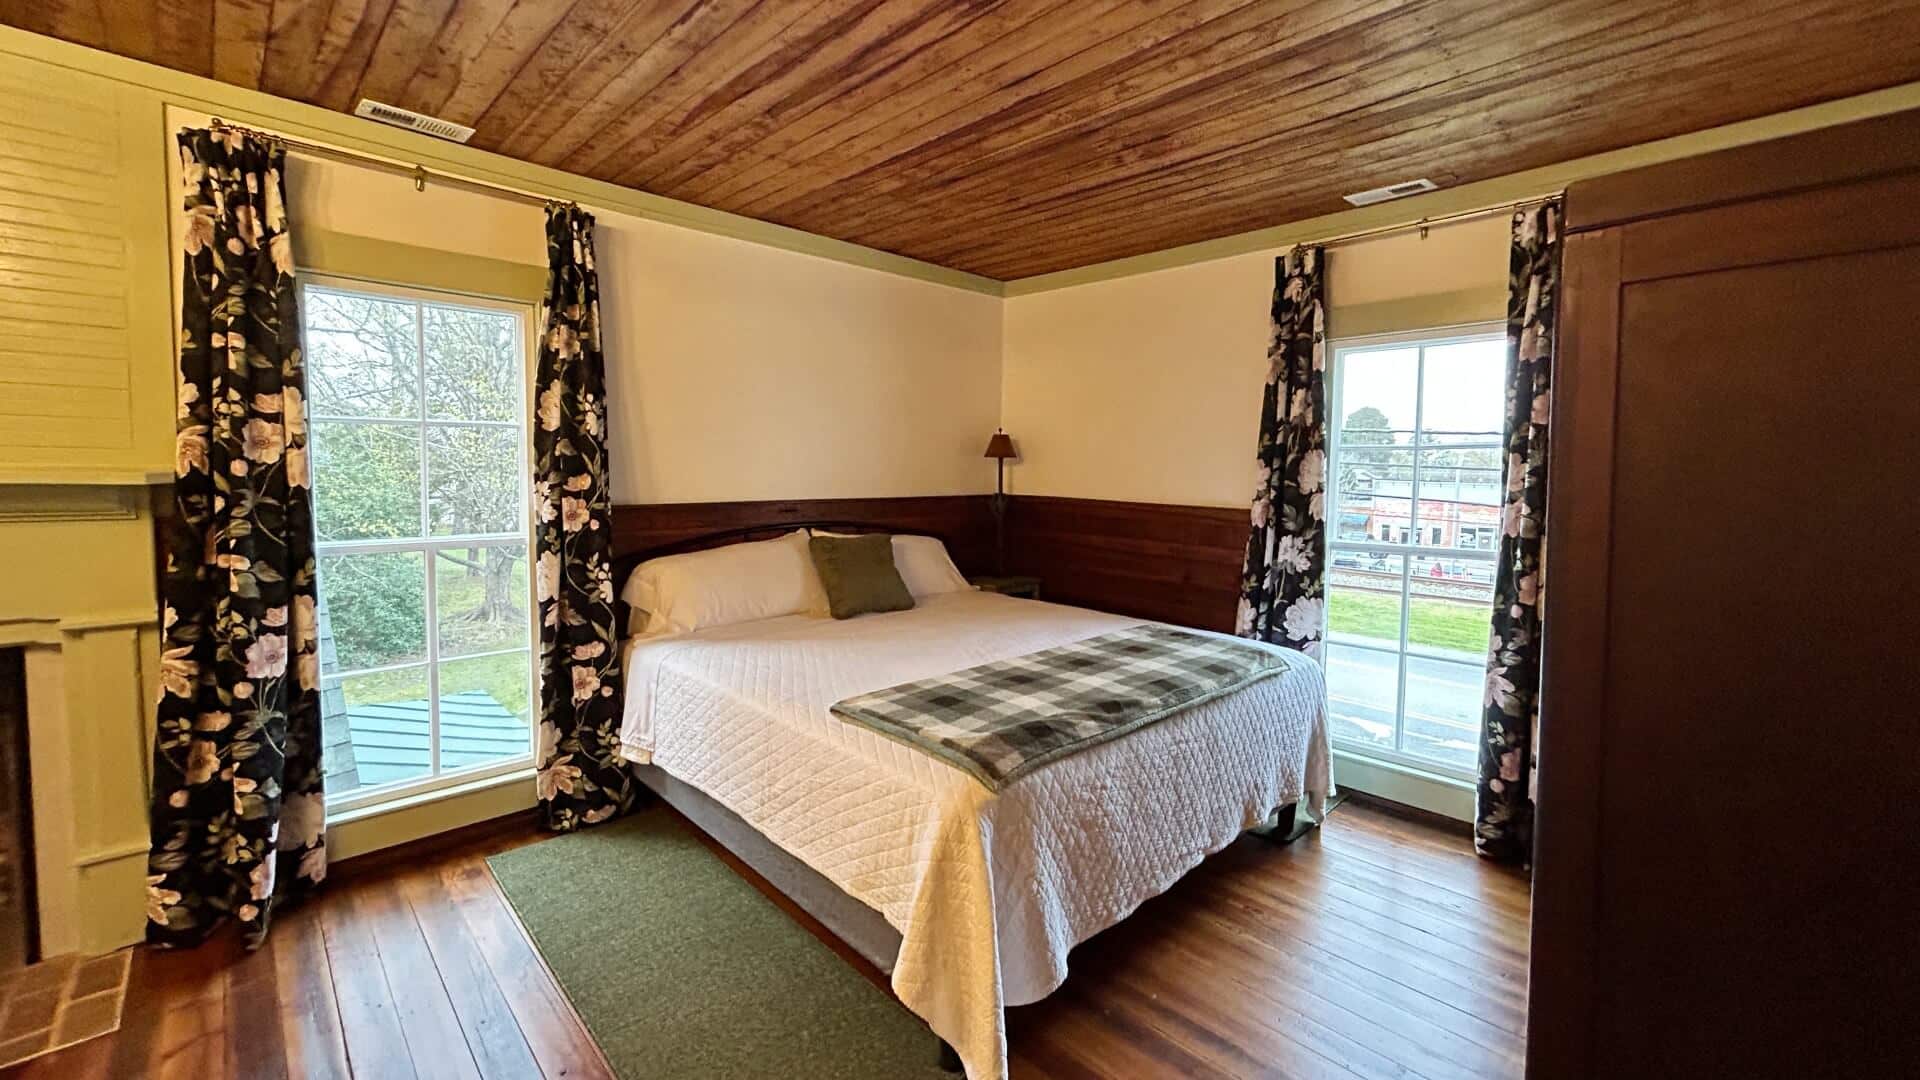 Spacious bedroom with queen bed, tall armoire and large windows with floral curtains